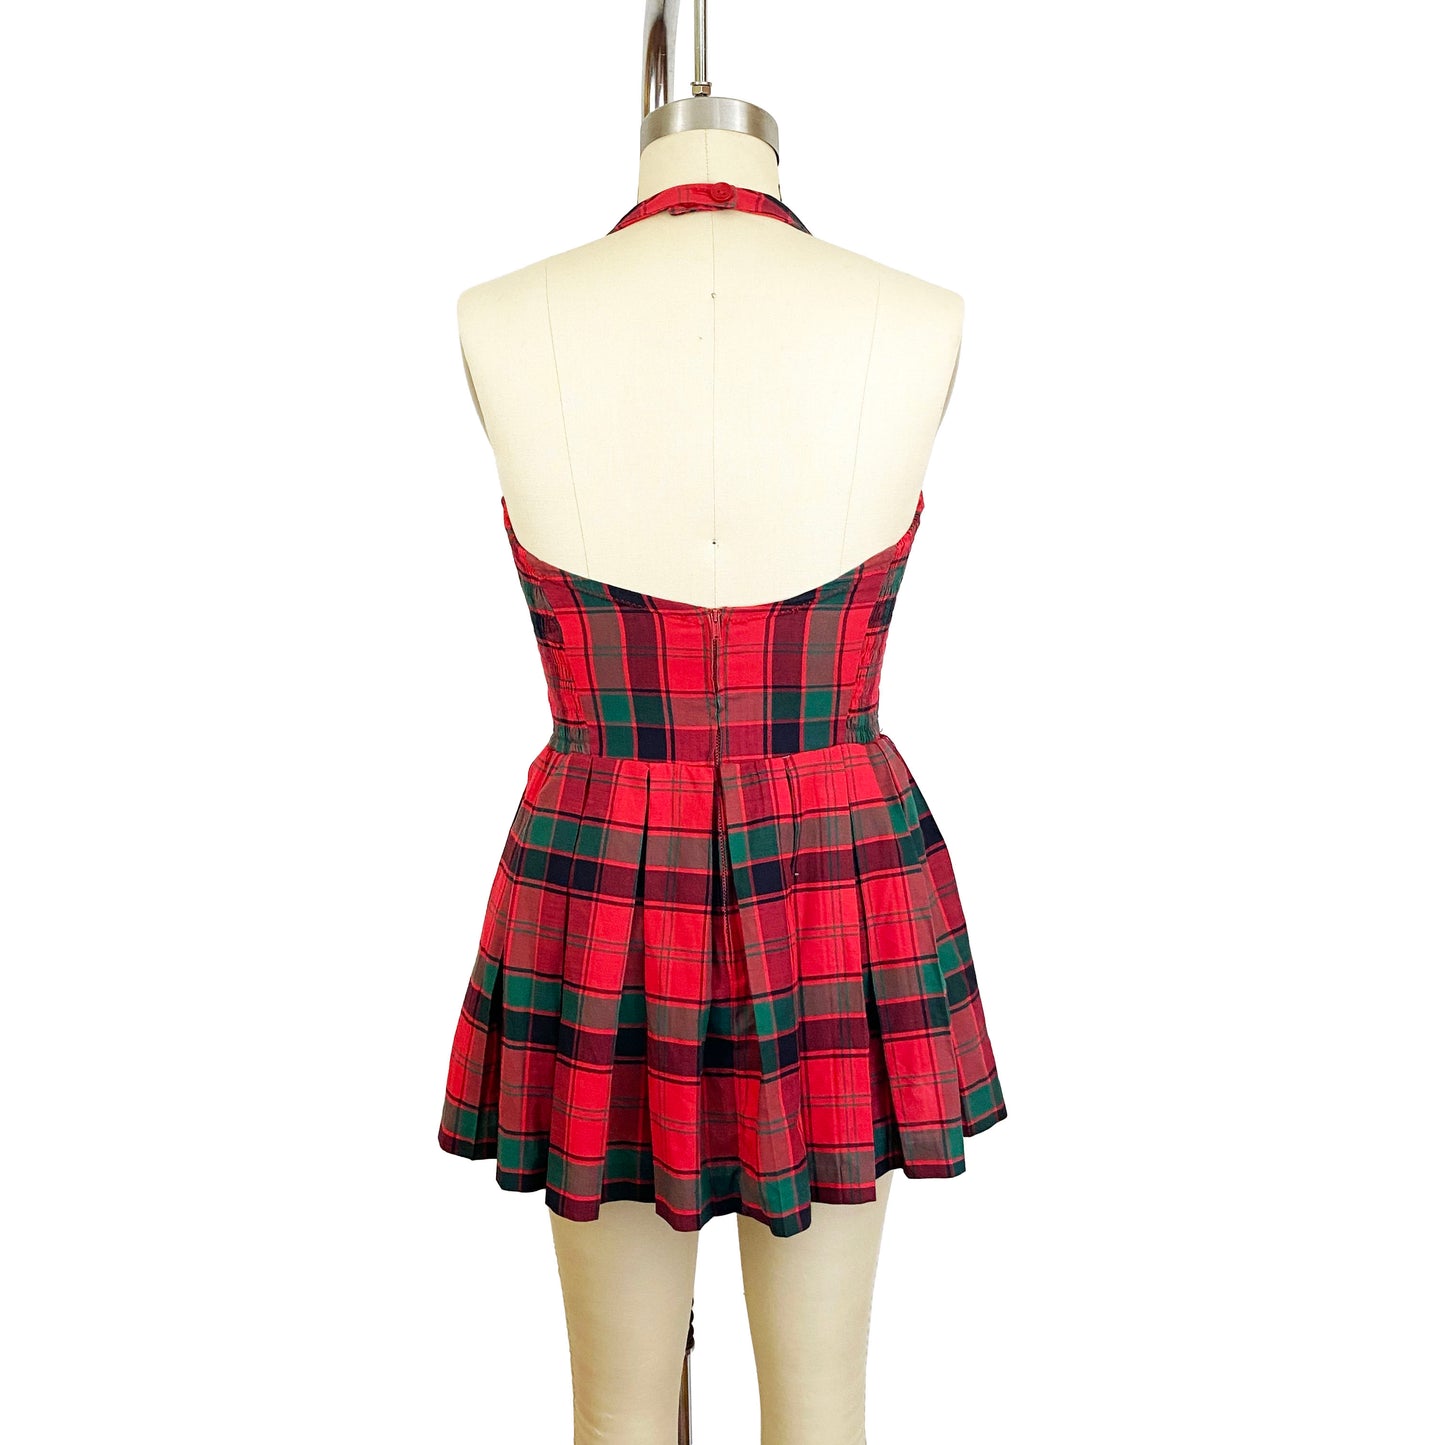 1950s Brigance for Sinclair Red Green Plaid Playsuit Halter Mini Dress Retro Bathing Suit Pin Up Rockabilly / Medium